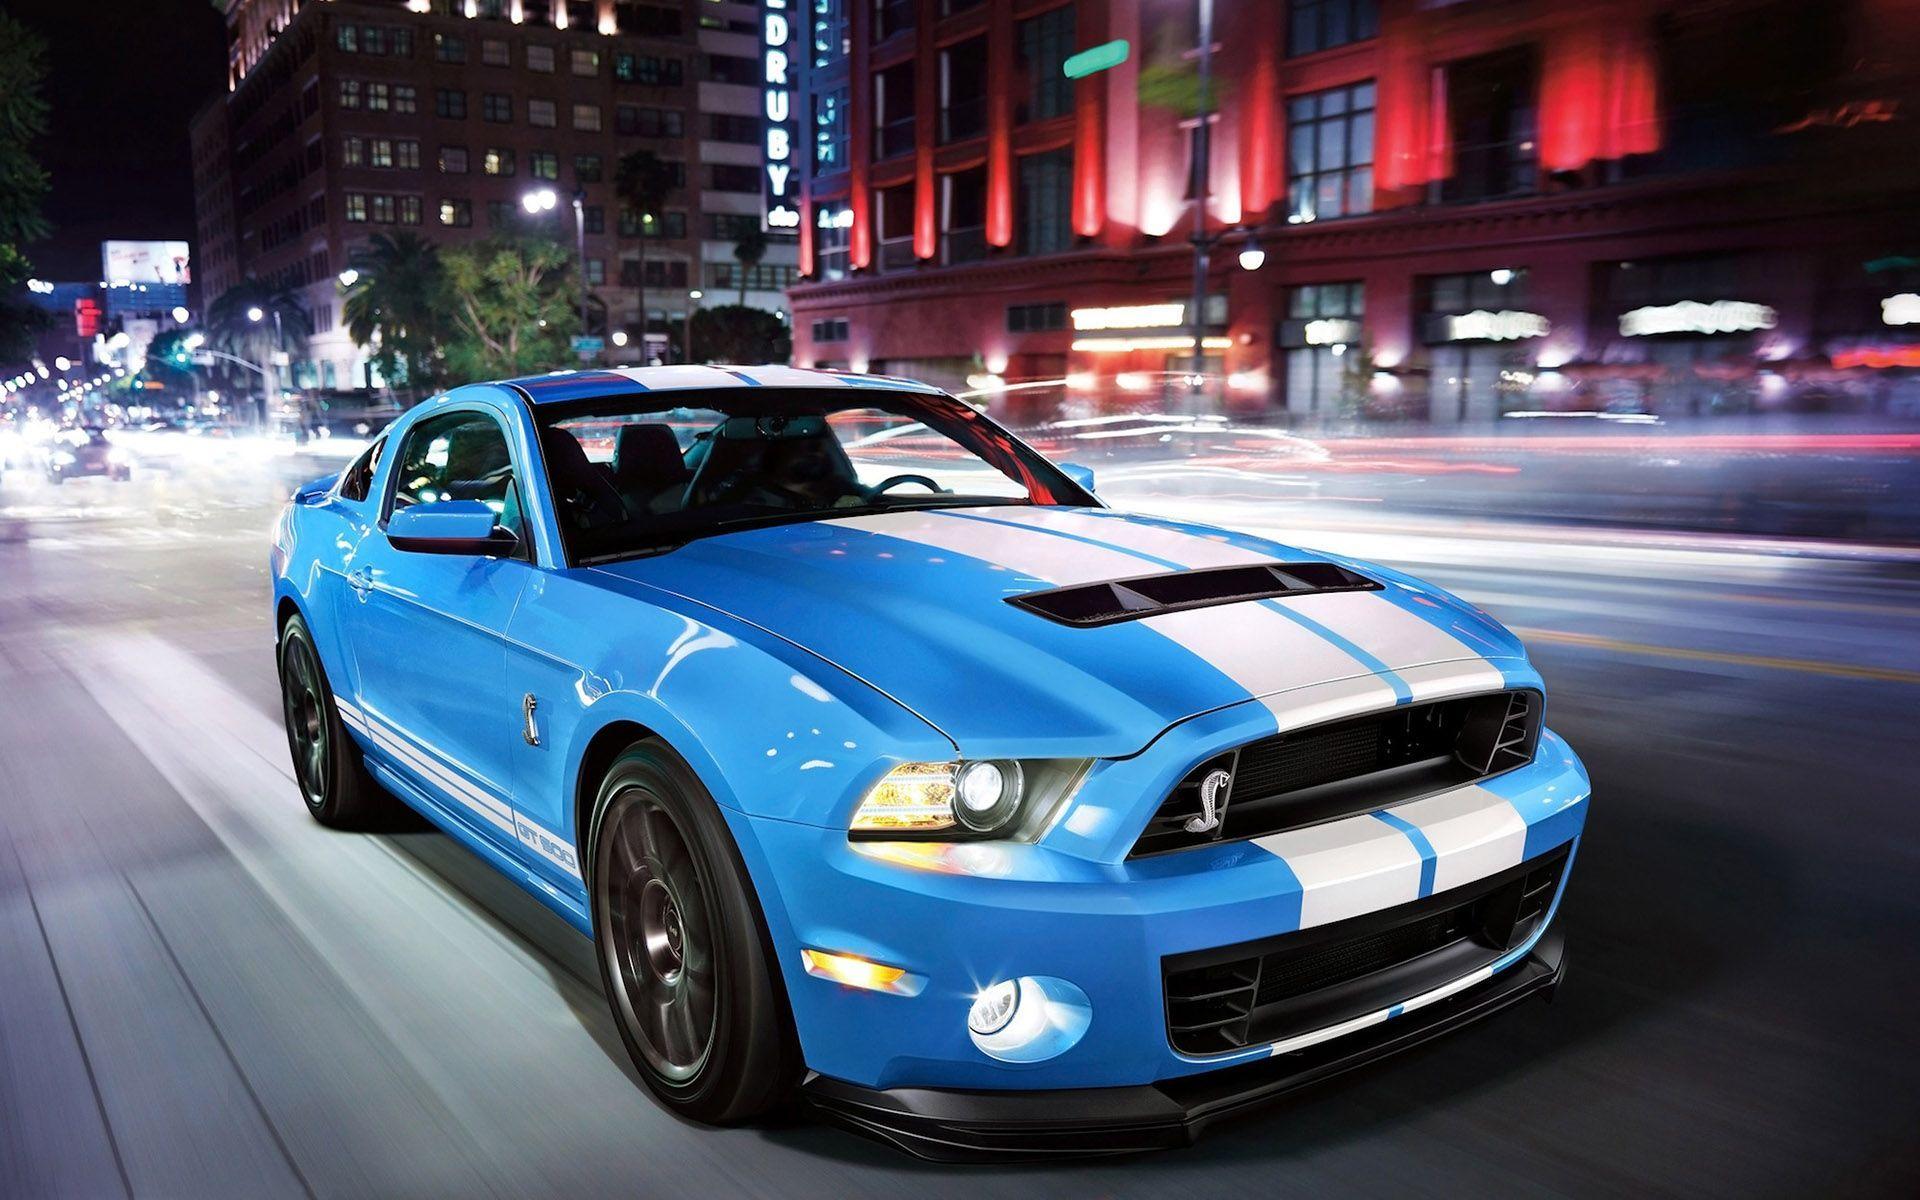 Ford Mustang Shelby GT500 Wallpaper Wide or HD